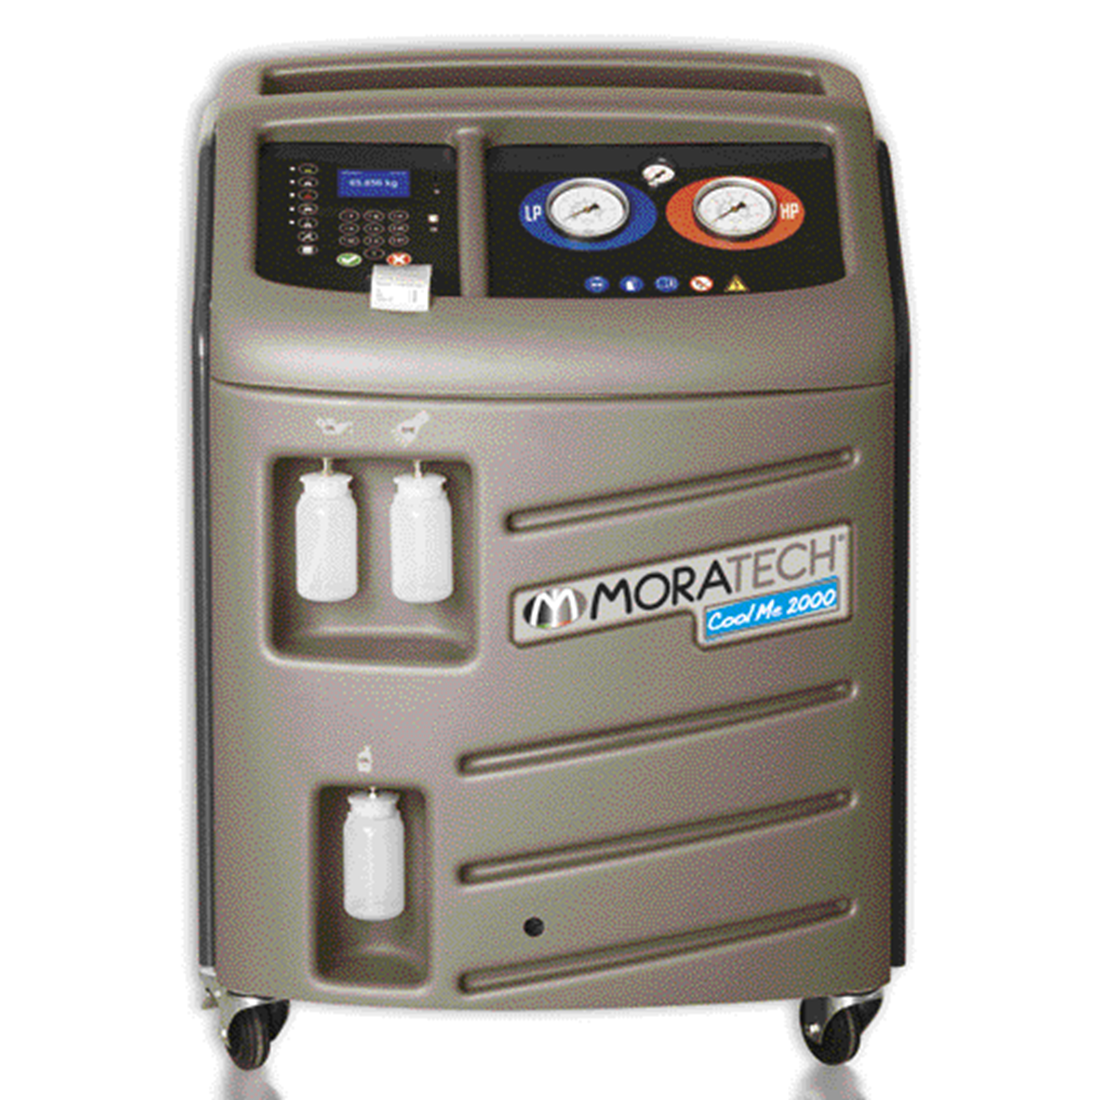 Cool Me 2000 Air Conditioning Machine - In Stock